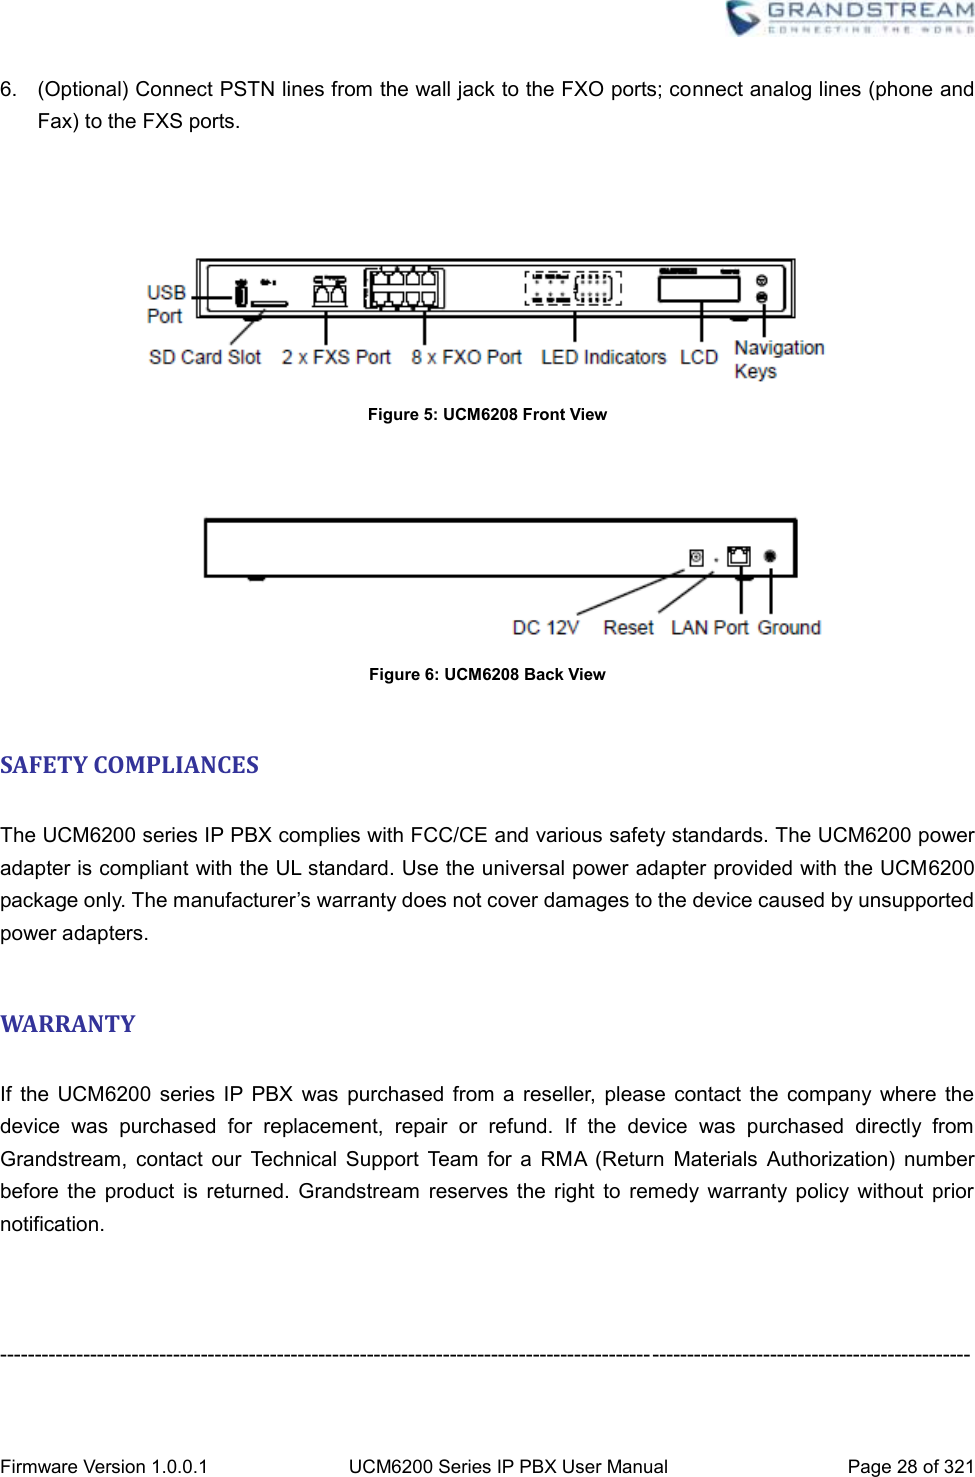  Firmware Version 1.0.0.1 UCM6200 Series IP PBX User Manual Page 28 of 321    6.  (Optional) Connect PSTN lines from the wall jack to the FXO ports; connect analog lines (phone and Fax) to the FXS ports.     Figure 5: UCM6208 Front View      Figure 6: UCM6208 Back View  SAFETY COMPLIANCES  The UCM6200 series IP PBX complies with FCC/CE and various safety standards. The UCM6200 power adapter is compliant with the UL standard. Use the universal power adapter provided with the UCM6200 package only. The manufacturer’s warranty does not cover damages to the device caused by unsupported power adapters.  WARRANTY  If  the  UCM6200  series  IP  PBX  was  purchased  from a  reseller,  please  contact  the  company  where the device  was  purchased  for  replacement,  repair  or  refund.  If  the  device  was  purchased  directly  from Grandstream,  contact  our  Technical  Support  Team  for  a  RMA  (Return  Materials  Authorization)  number before  the  product  is  returned.  Grandstream  reserves  the  right  to  remedy  warranty  policy  without  prior notification.    -------------------------------------------------------------------------------------------------------------------------------------------- 